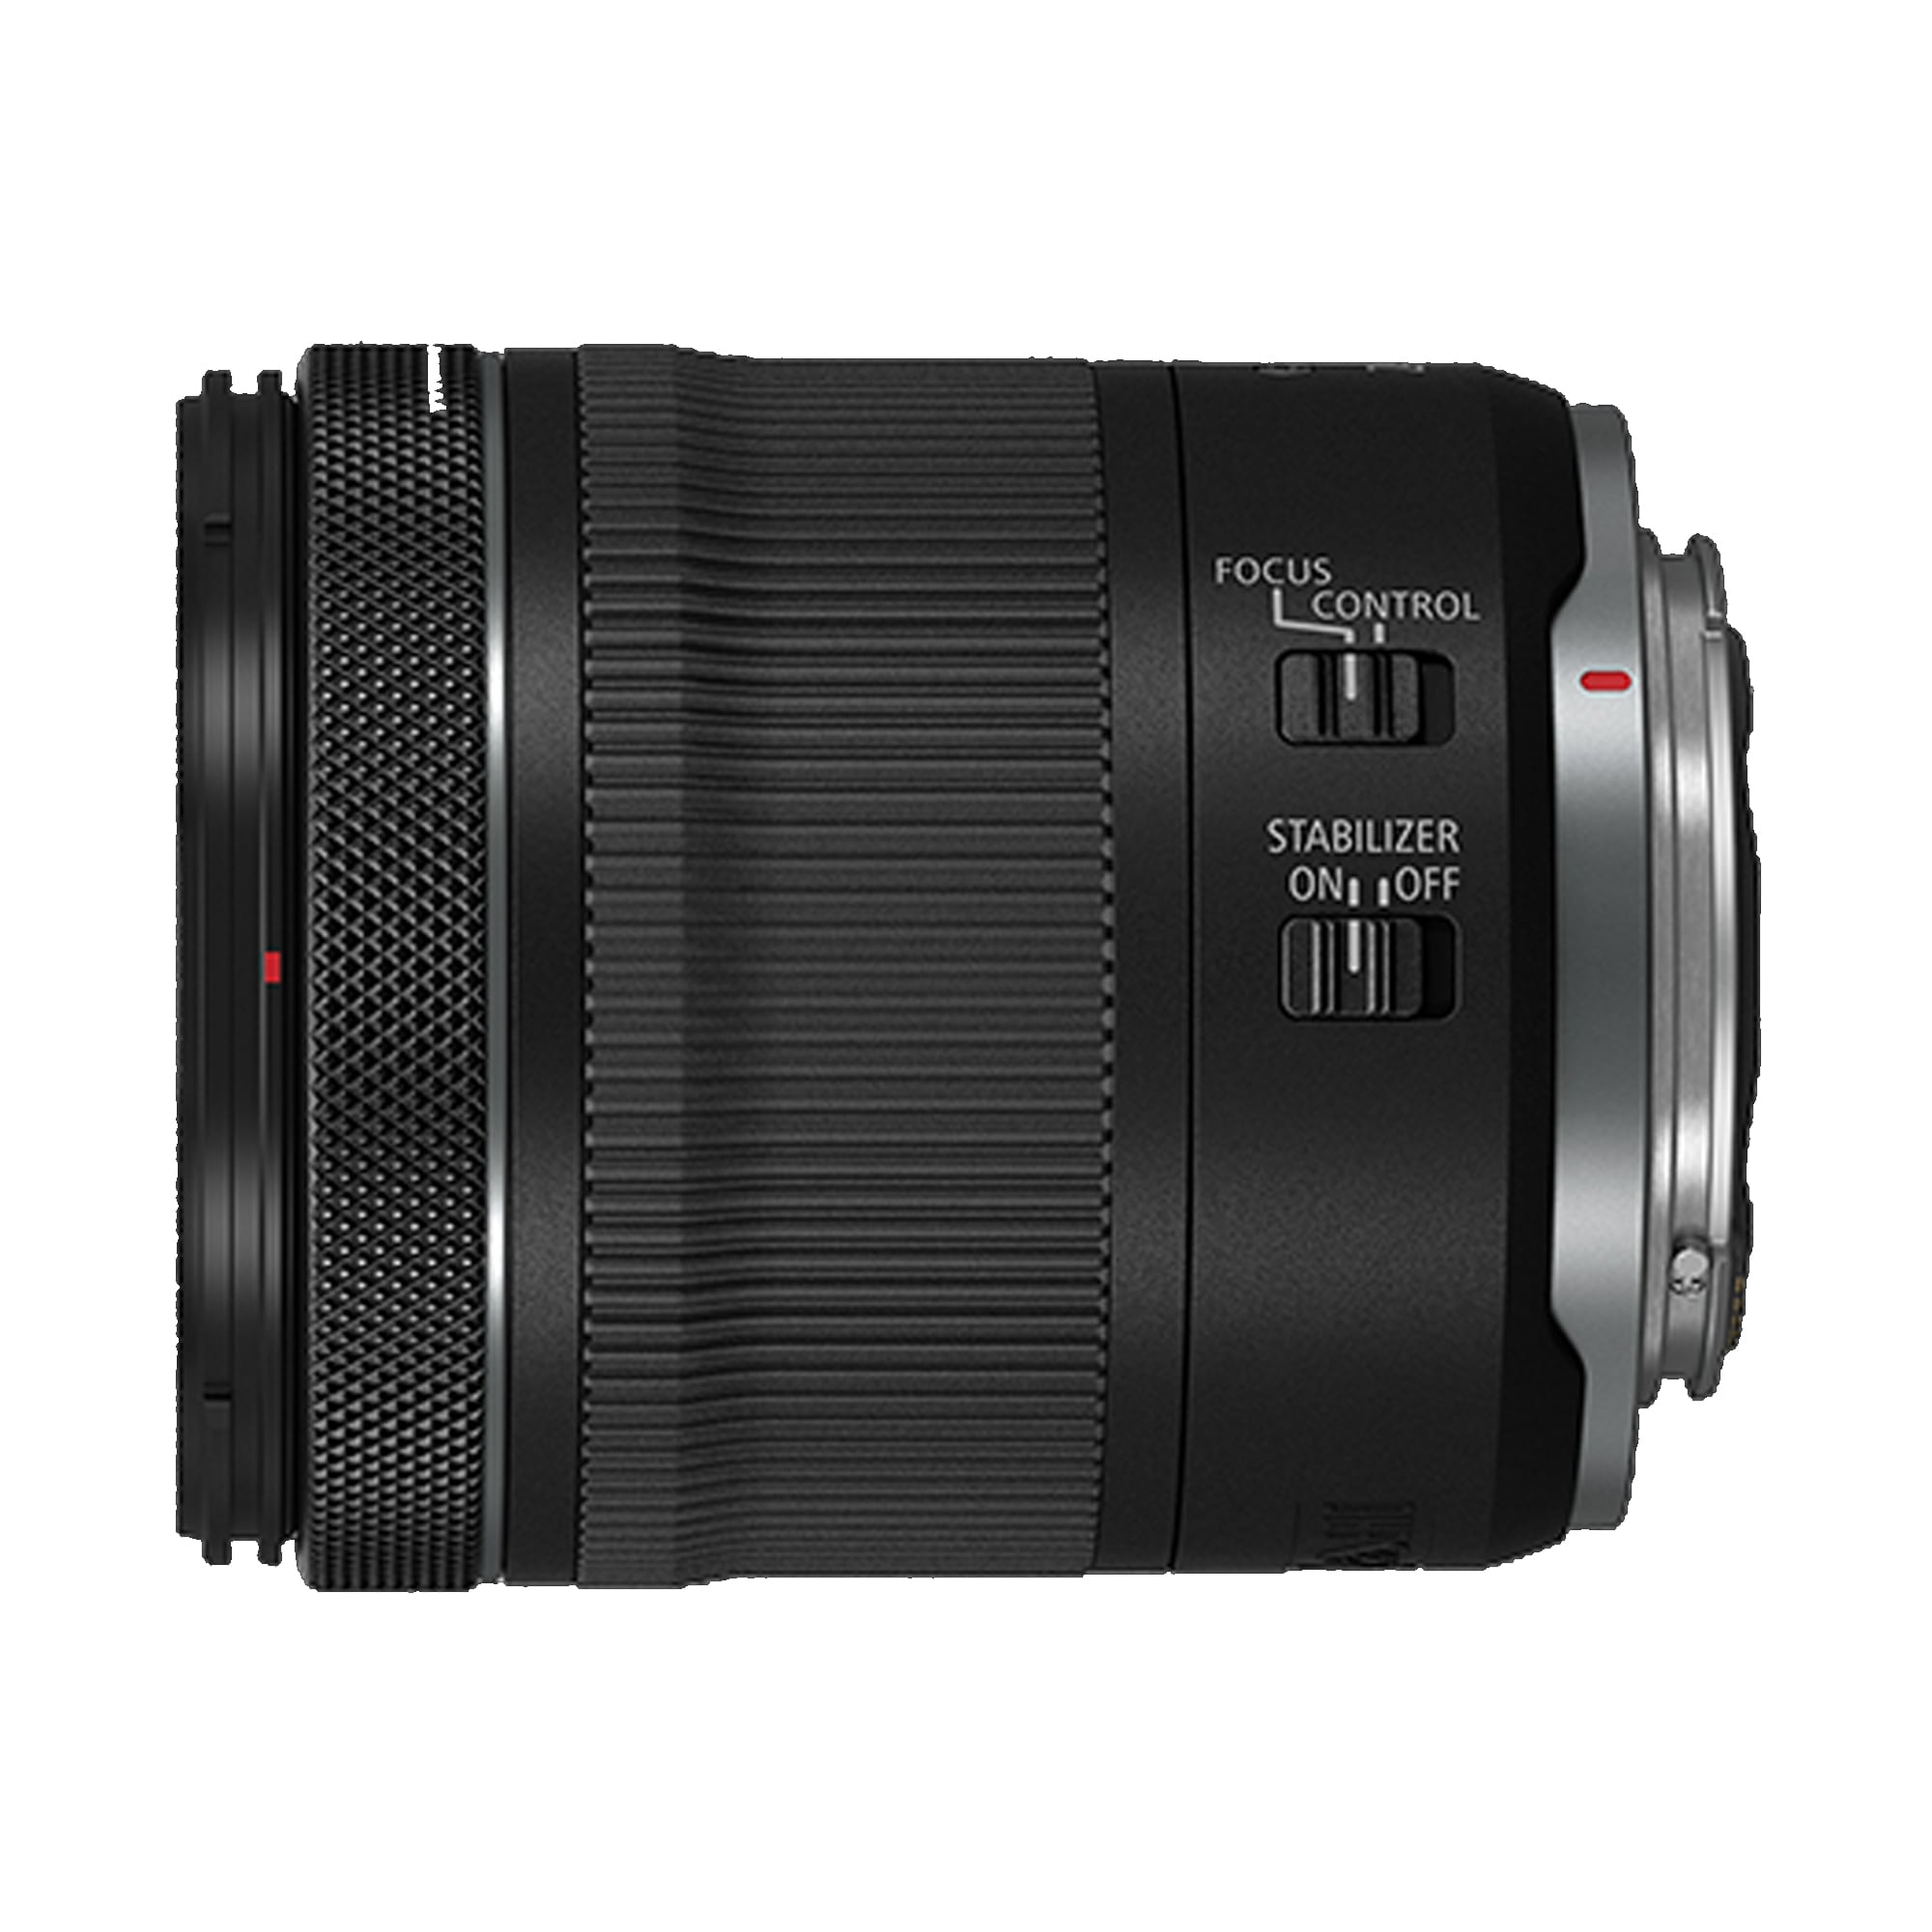 Canon RF 24-105 mm F/4-7.1 IS STM